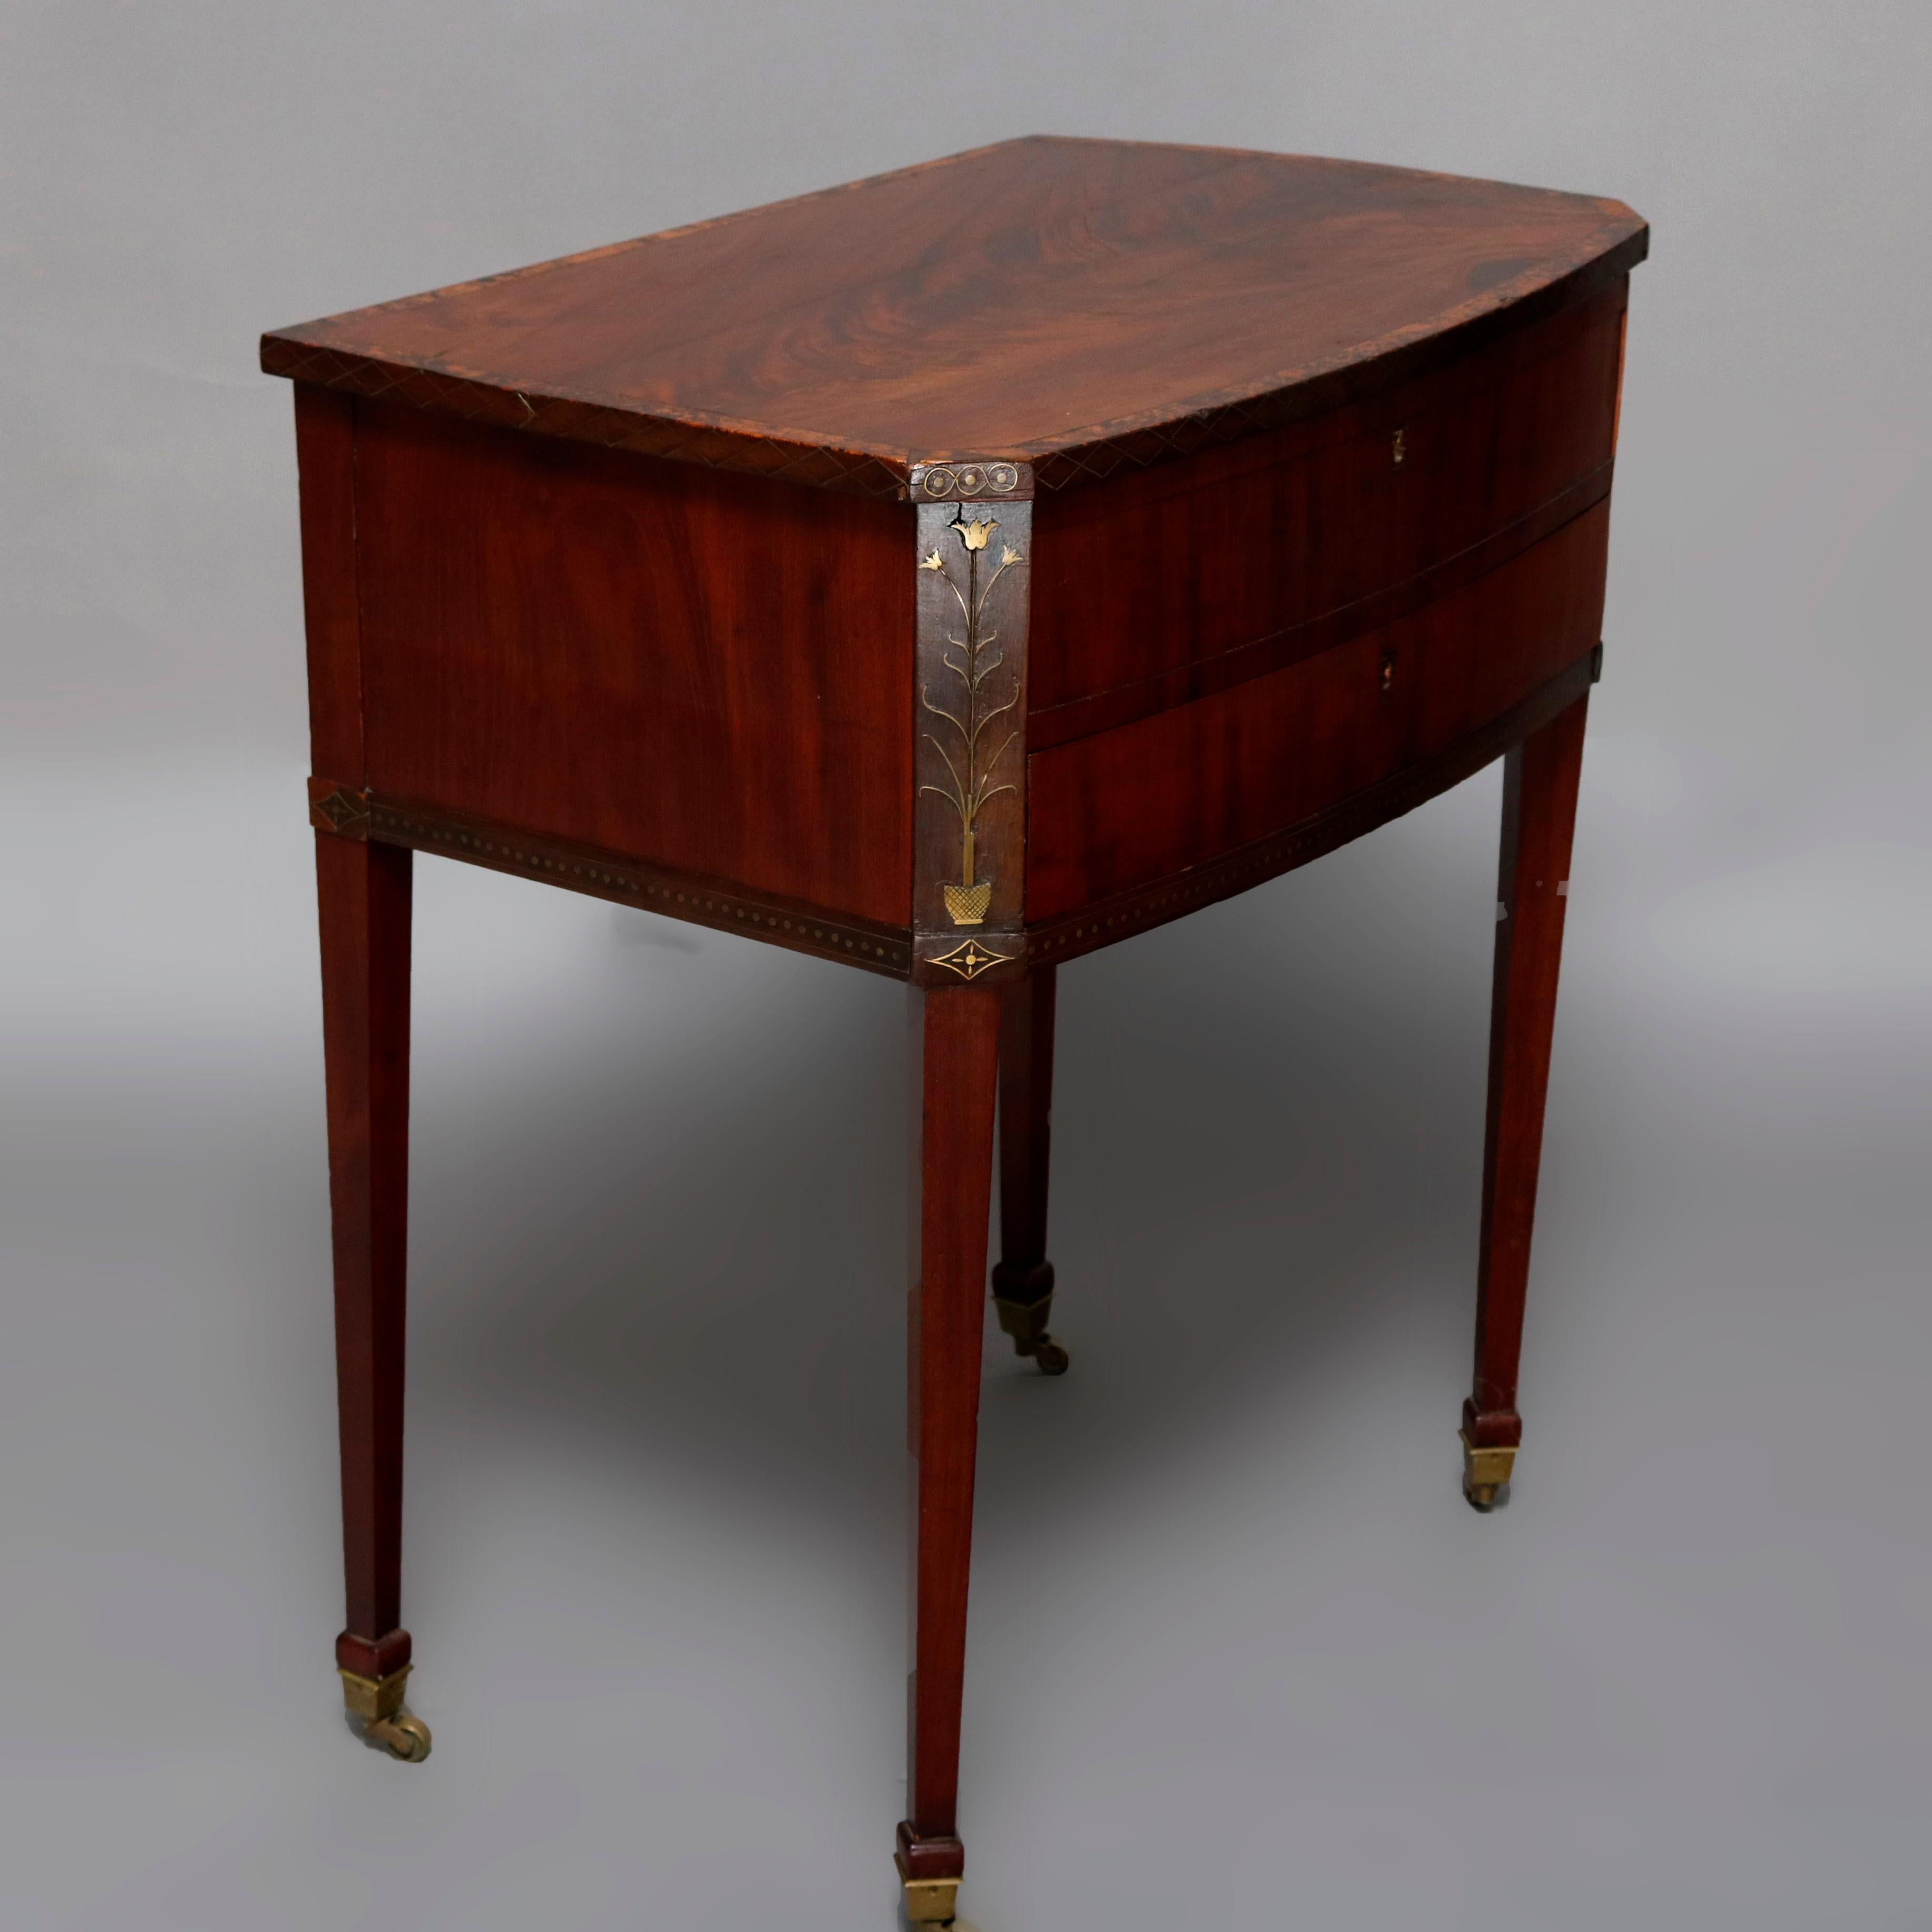 An antique English Hepplewhite sewing stand offers flame mahogany with cross banded lid lifting to reveal interior compartments, clipped corners of the case with satinwood marquetry inlaid potted flowers, satinwood banding inside lid and inlay trim